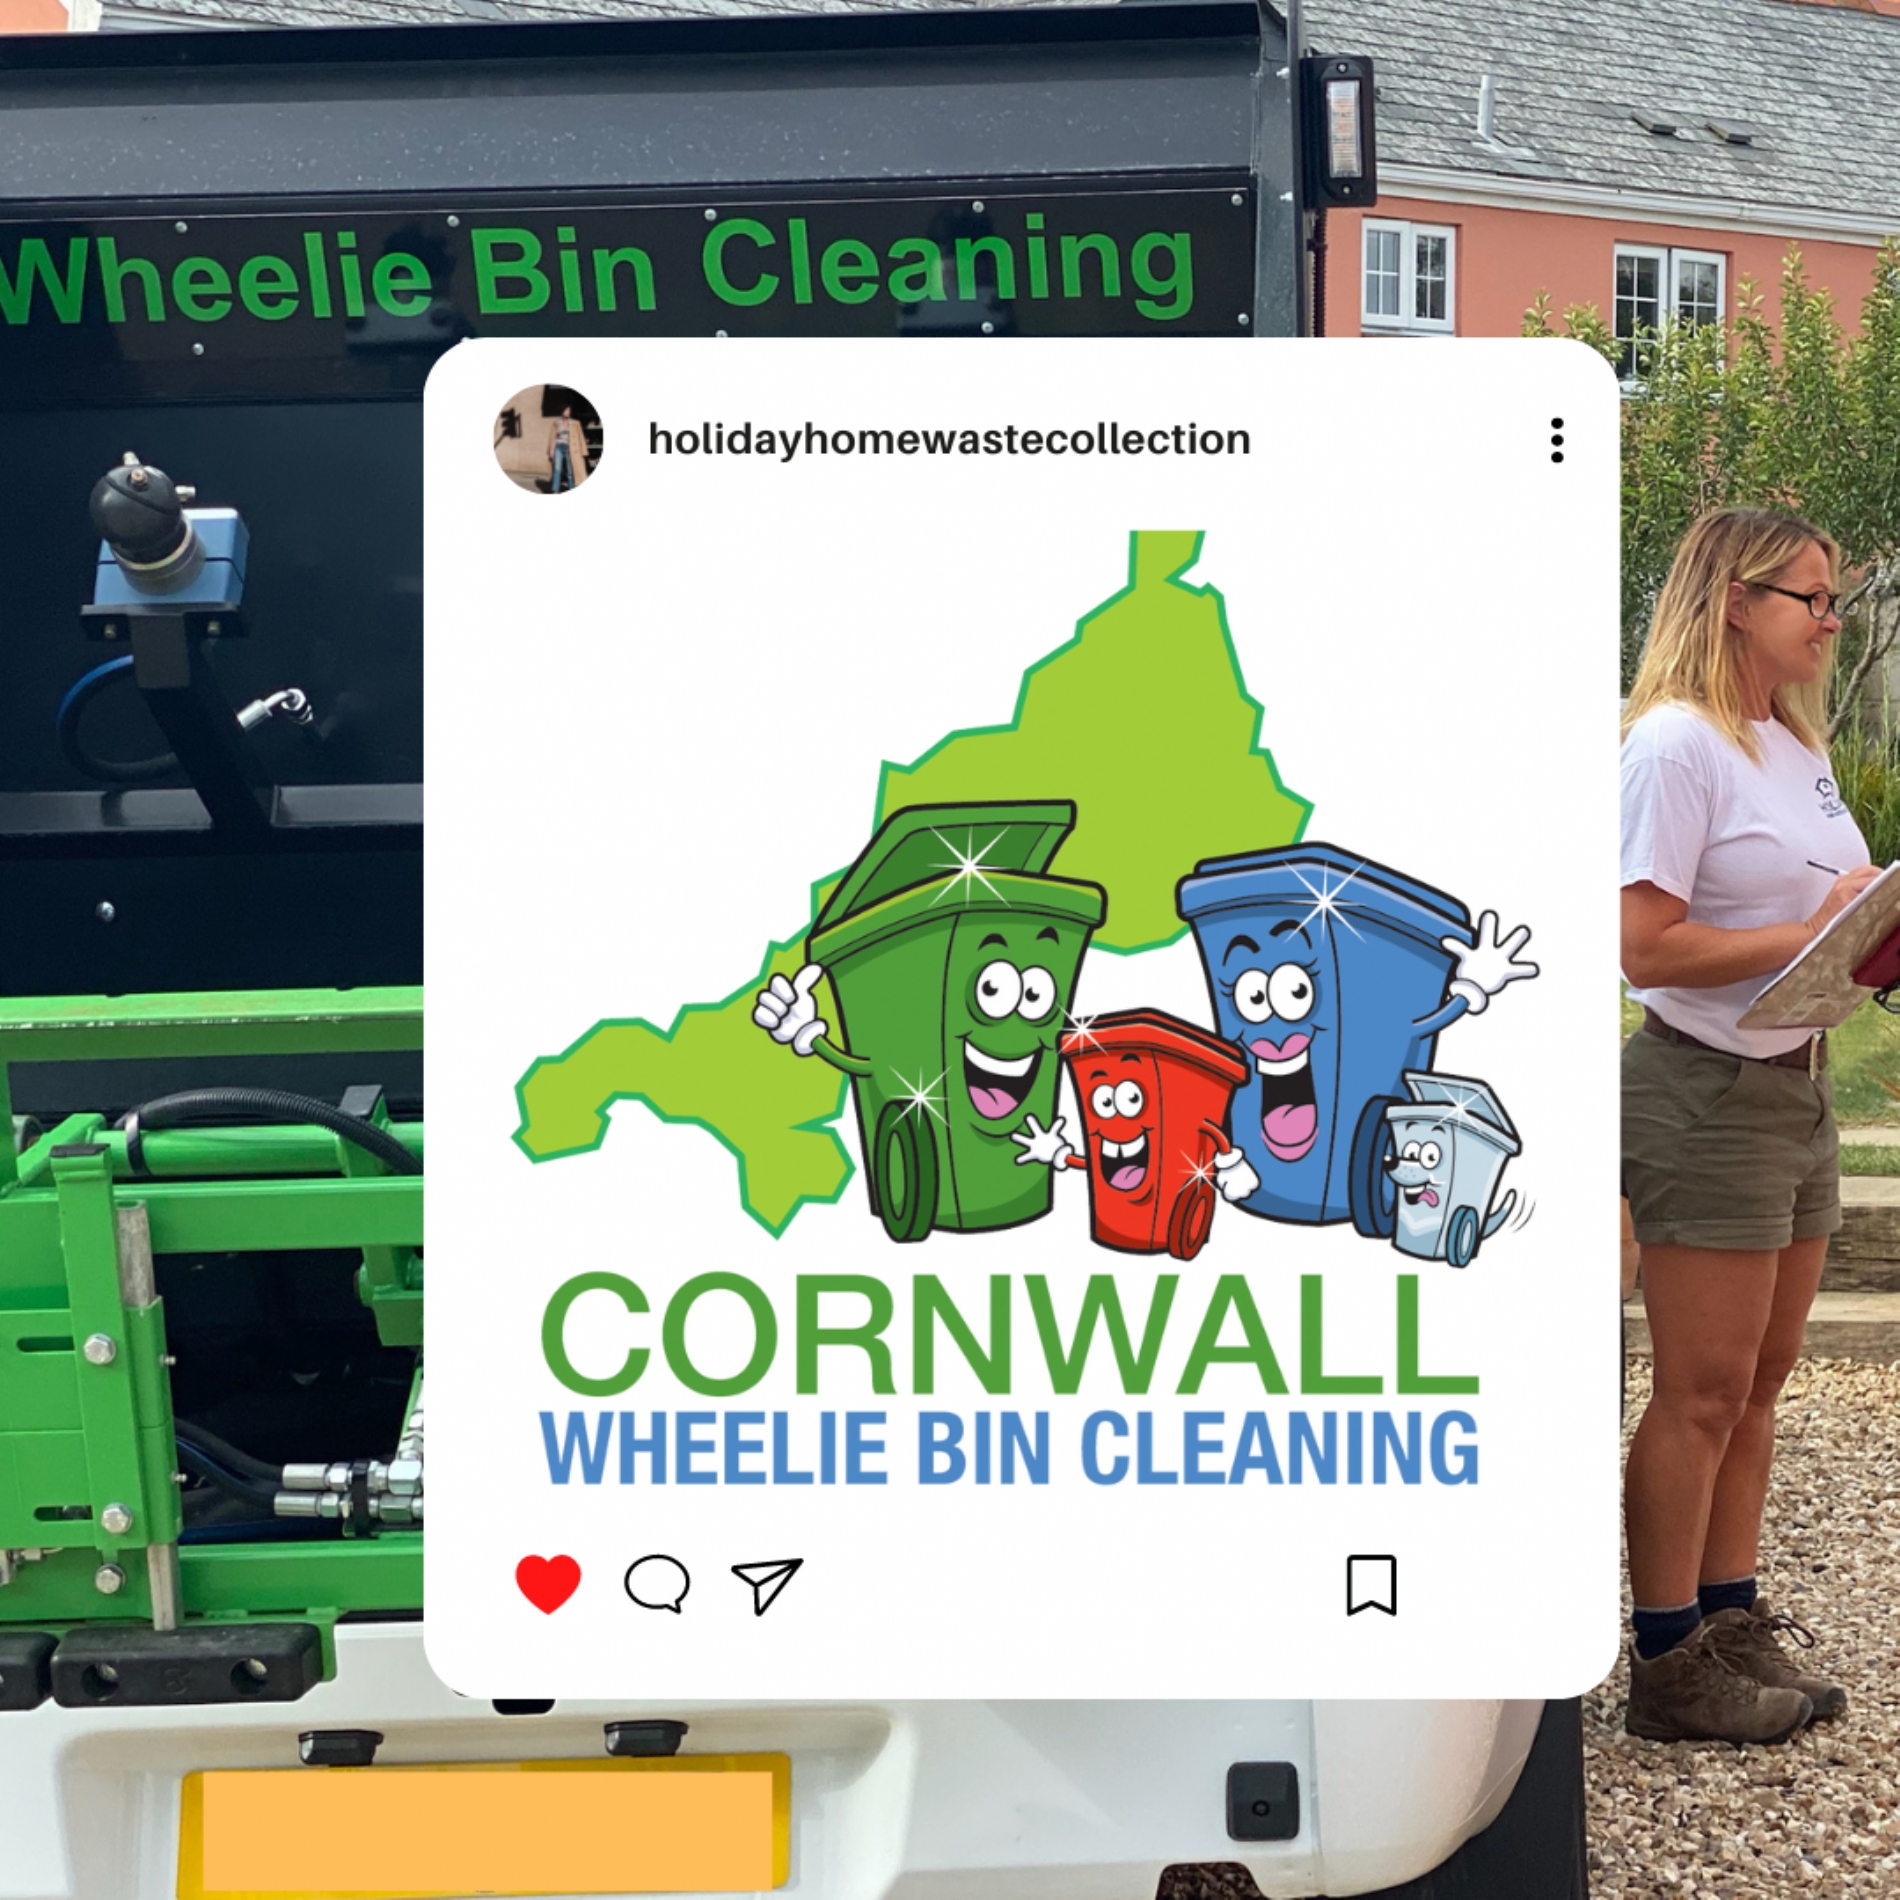 Time To Clean Up Your Wheelie Bin?